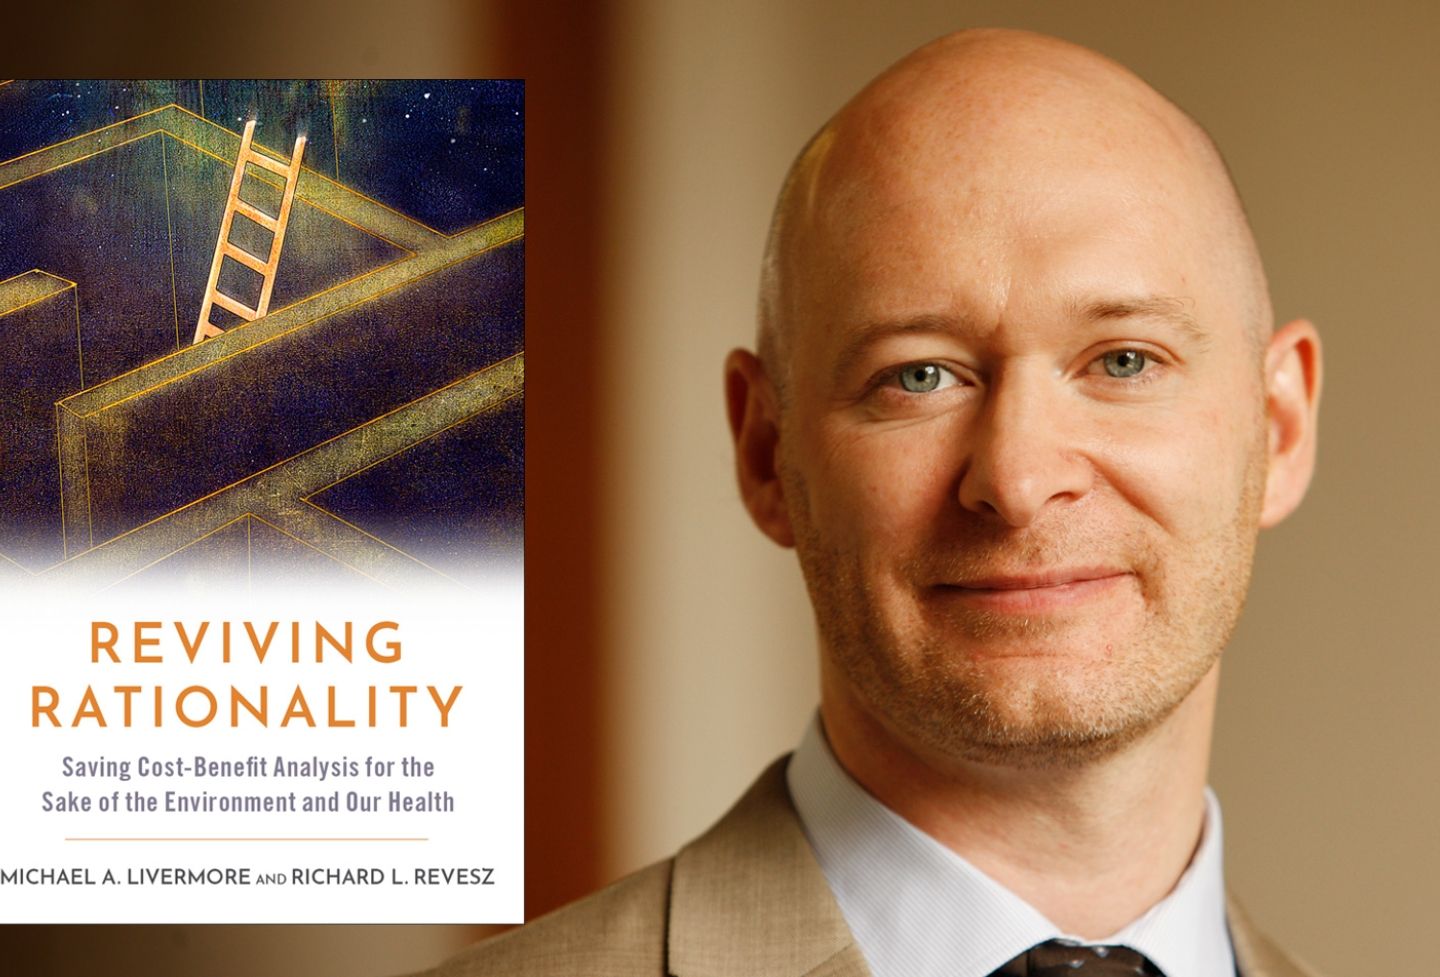 Michael Livermore and "Reviving Rationality"